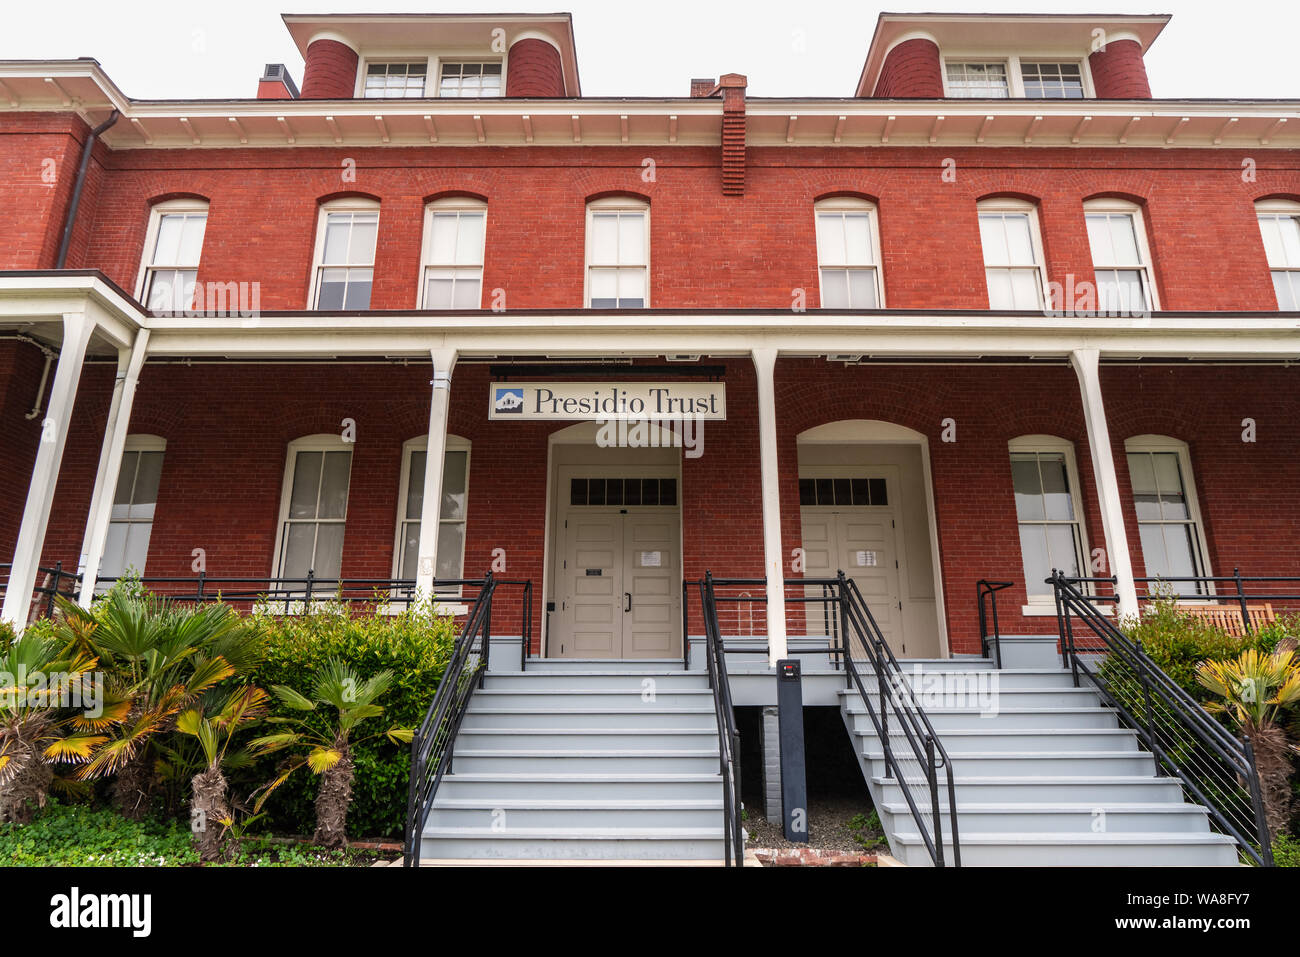 August 10, 2019 San Francisco / CA / USA - Presidio Trust headquarters  located on the grounds of Presidio of San Francisco in a Main Post building  Stock Photo - Alamy